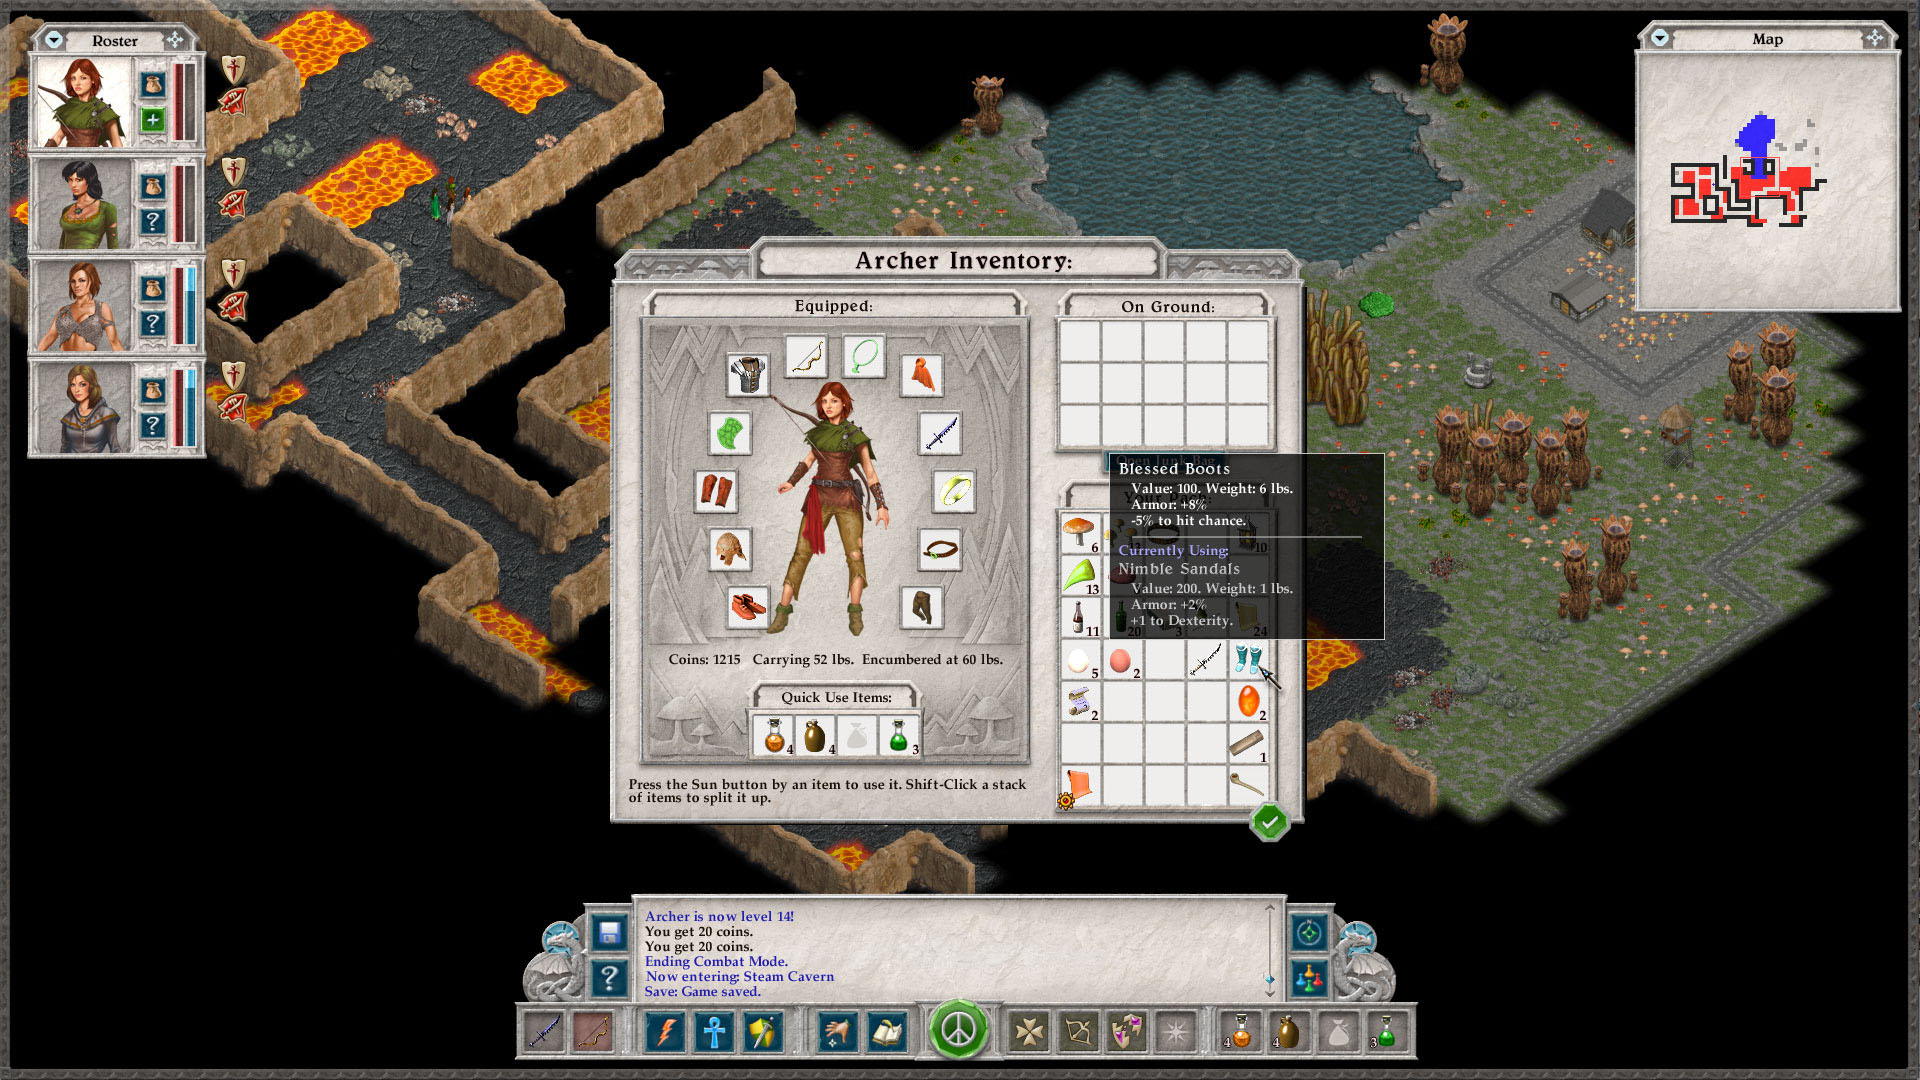 Avernum Wallpaper Image In Collection